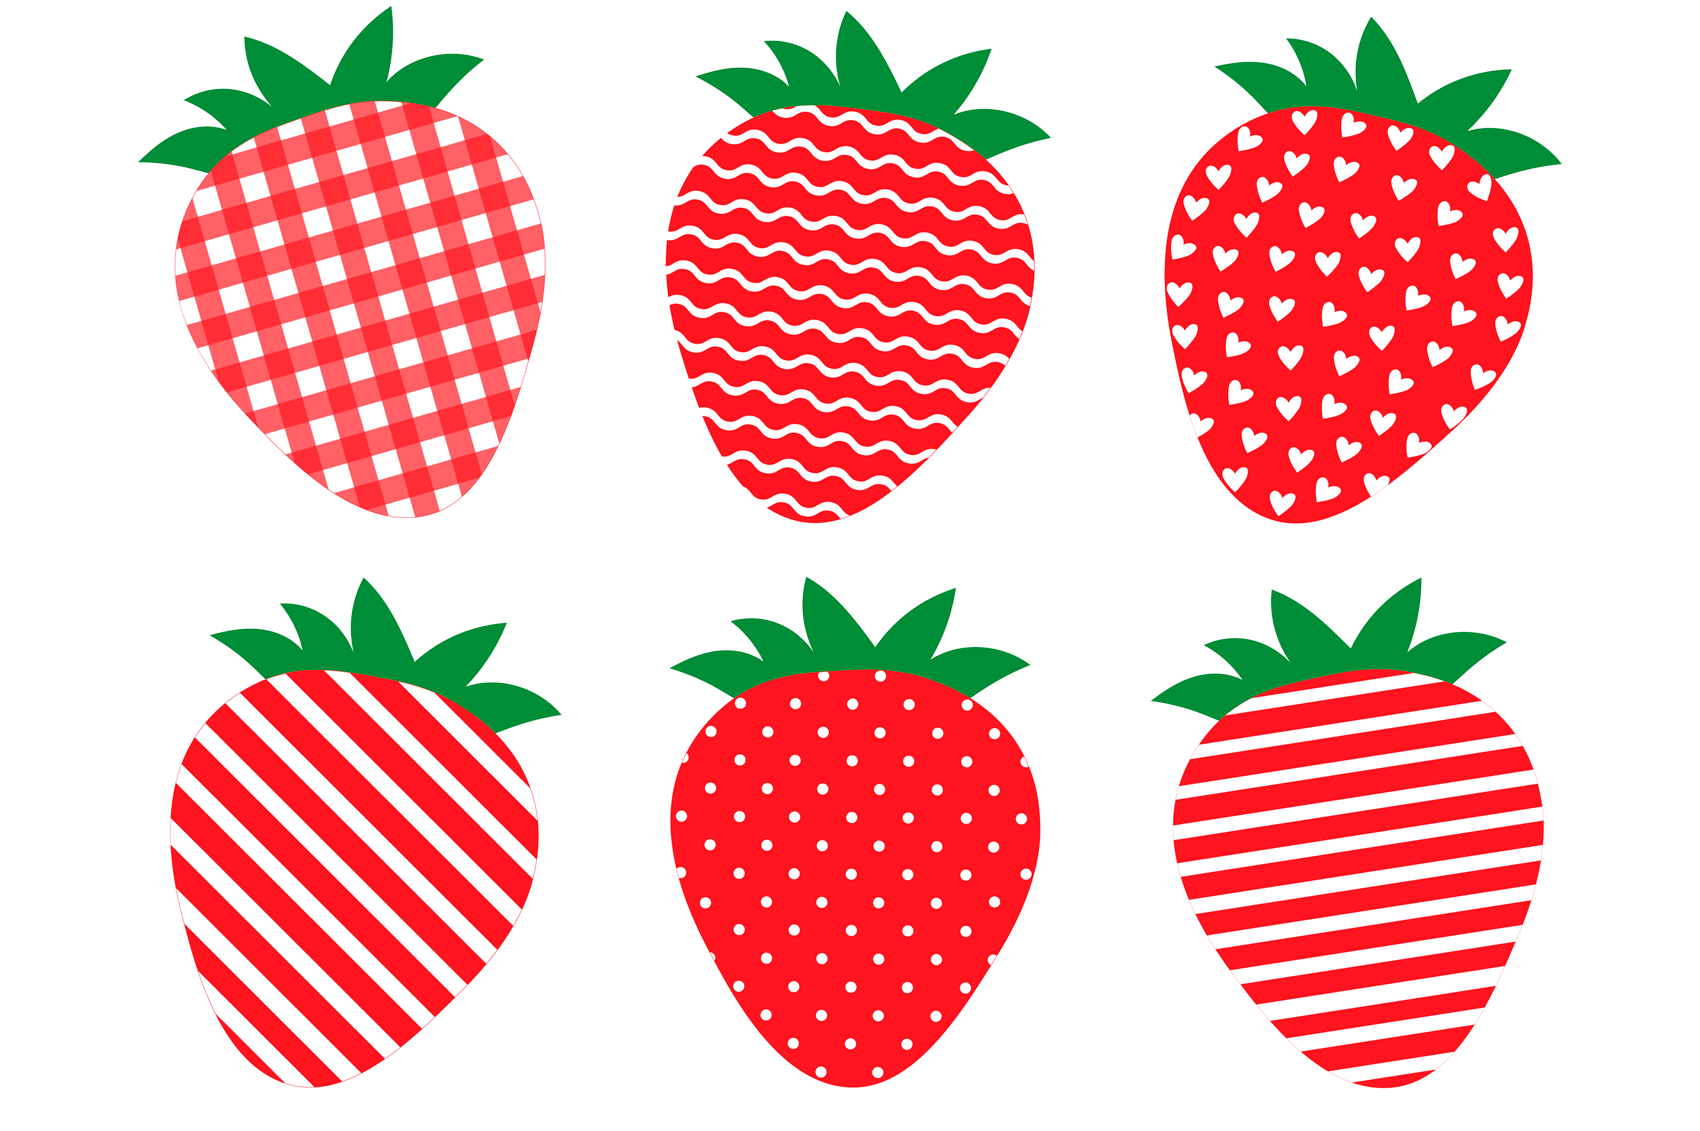 Strawberry SVG, PNG, EPS clipart and seamless patterns